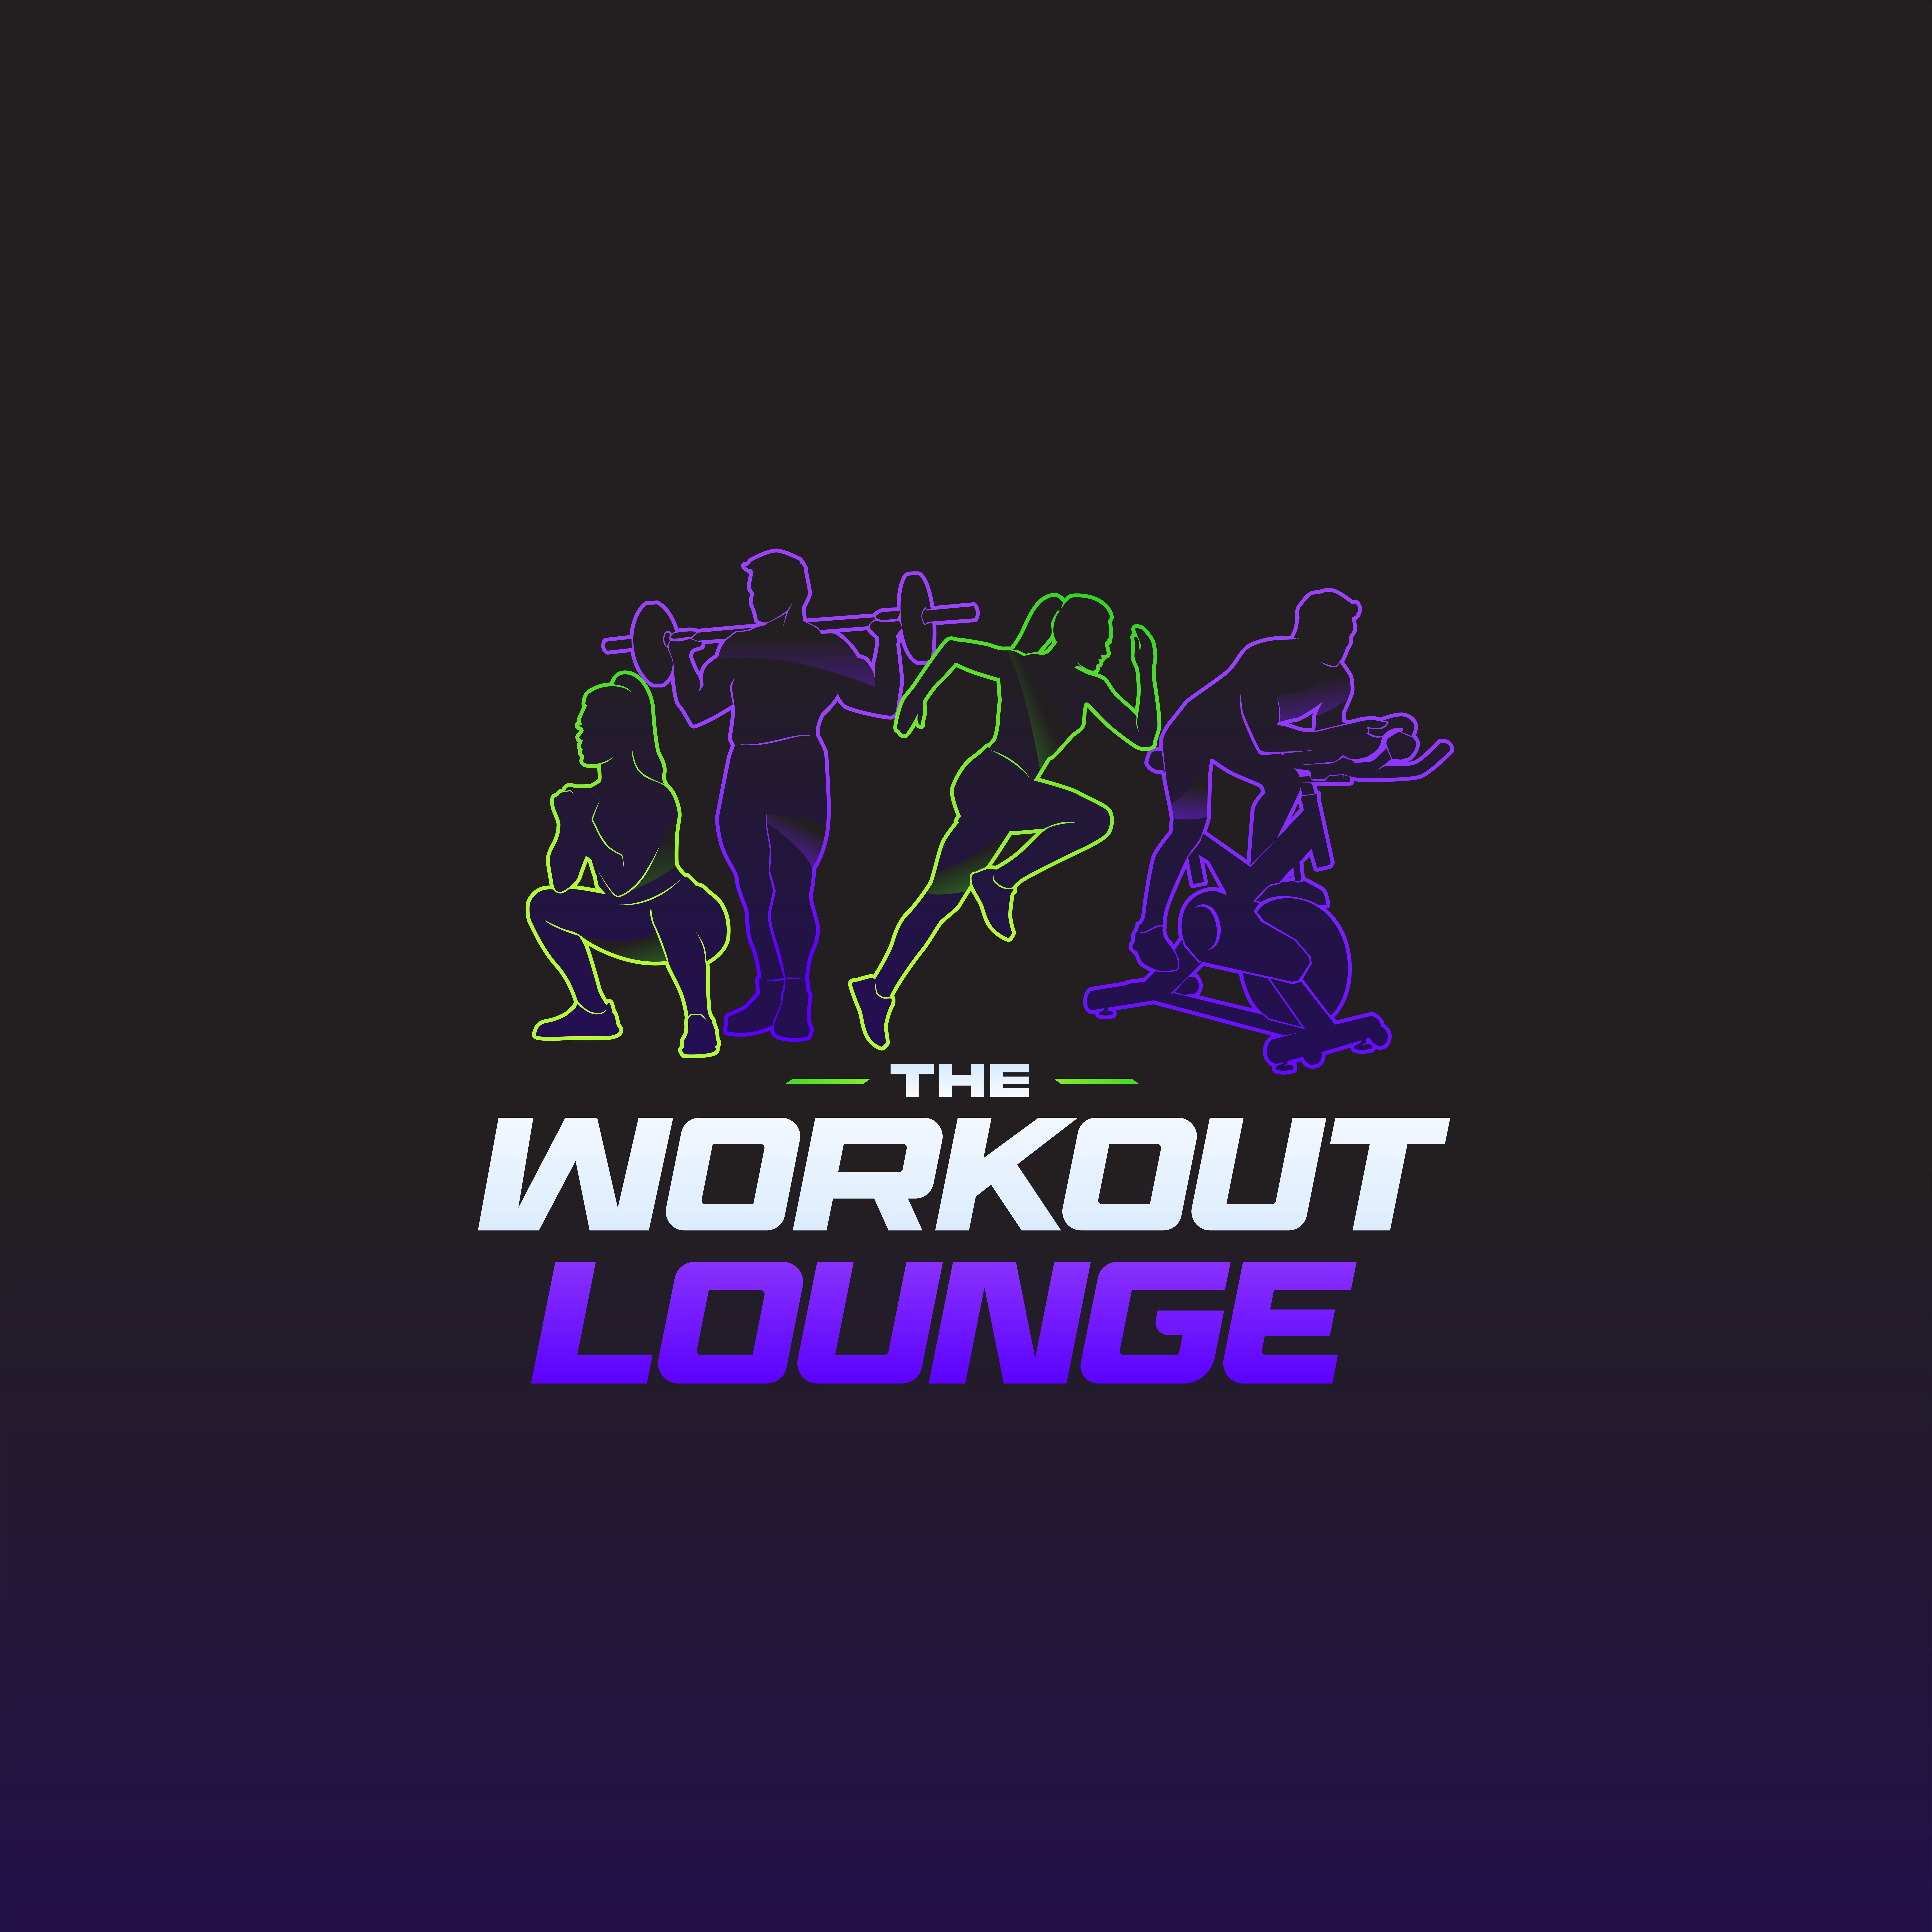 The Workout Lounge